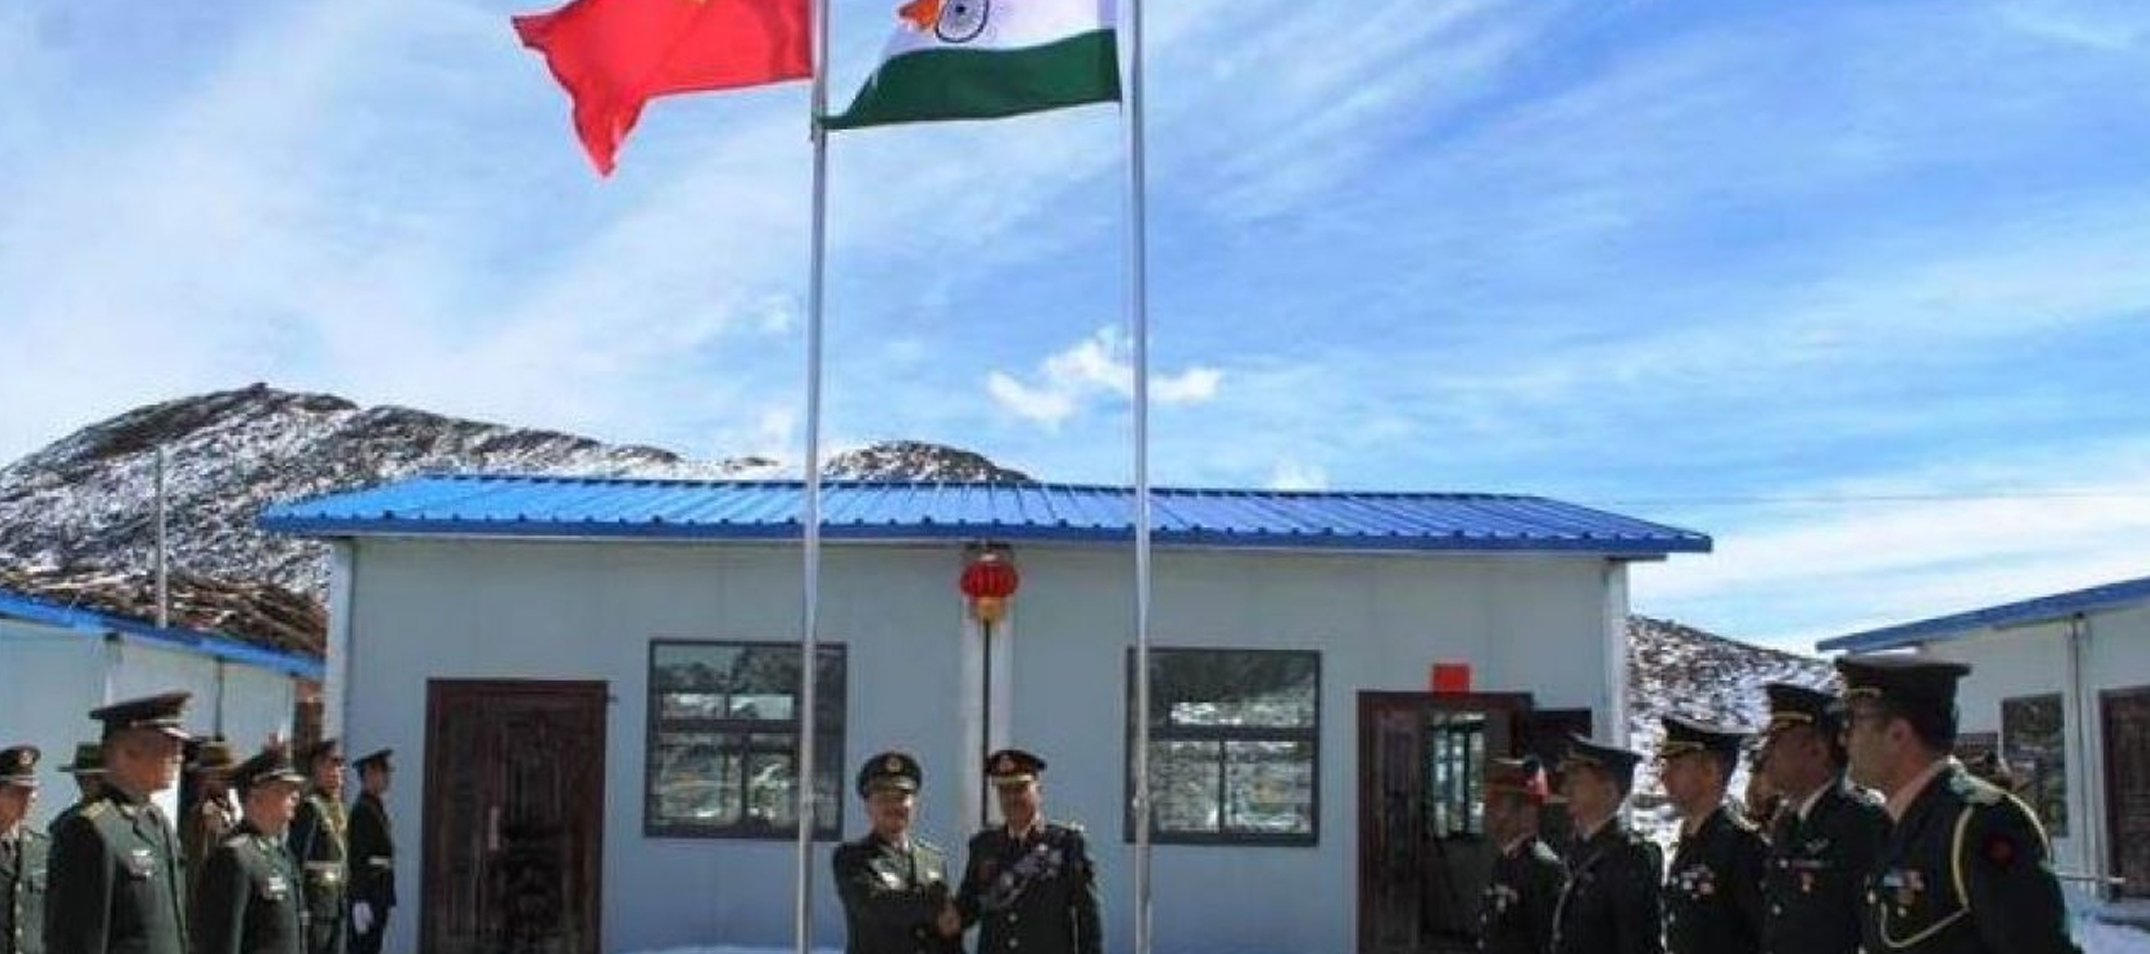 Indian Army participates in Border Personnel Meeting organized by PLA